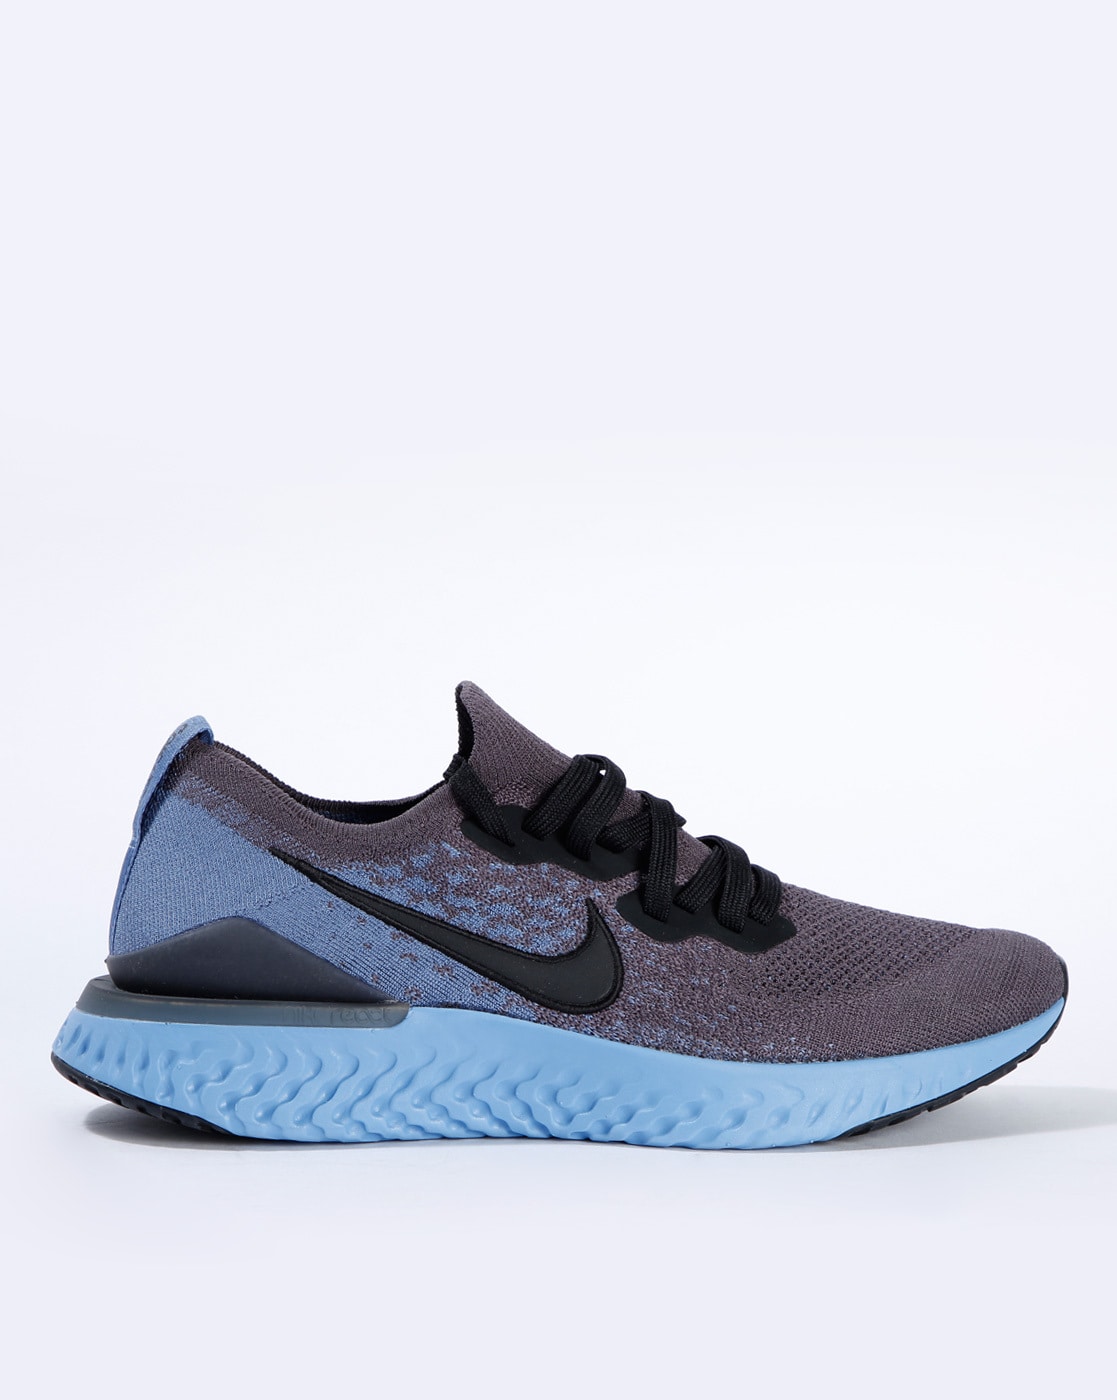 nike shoes online india